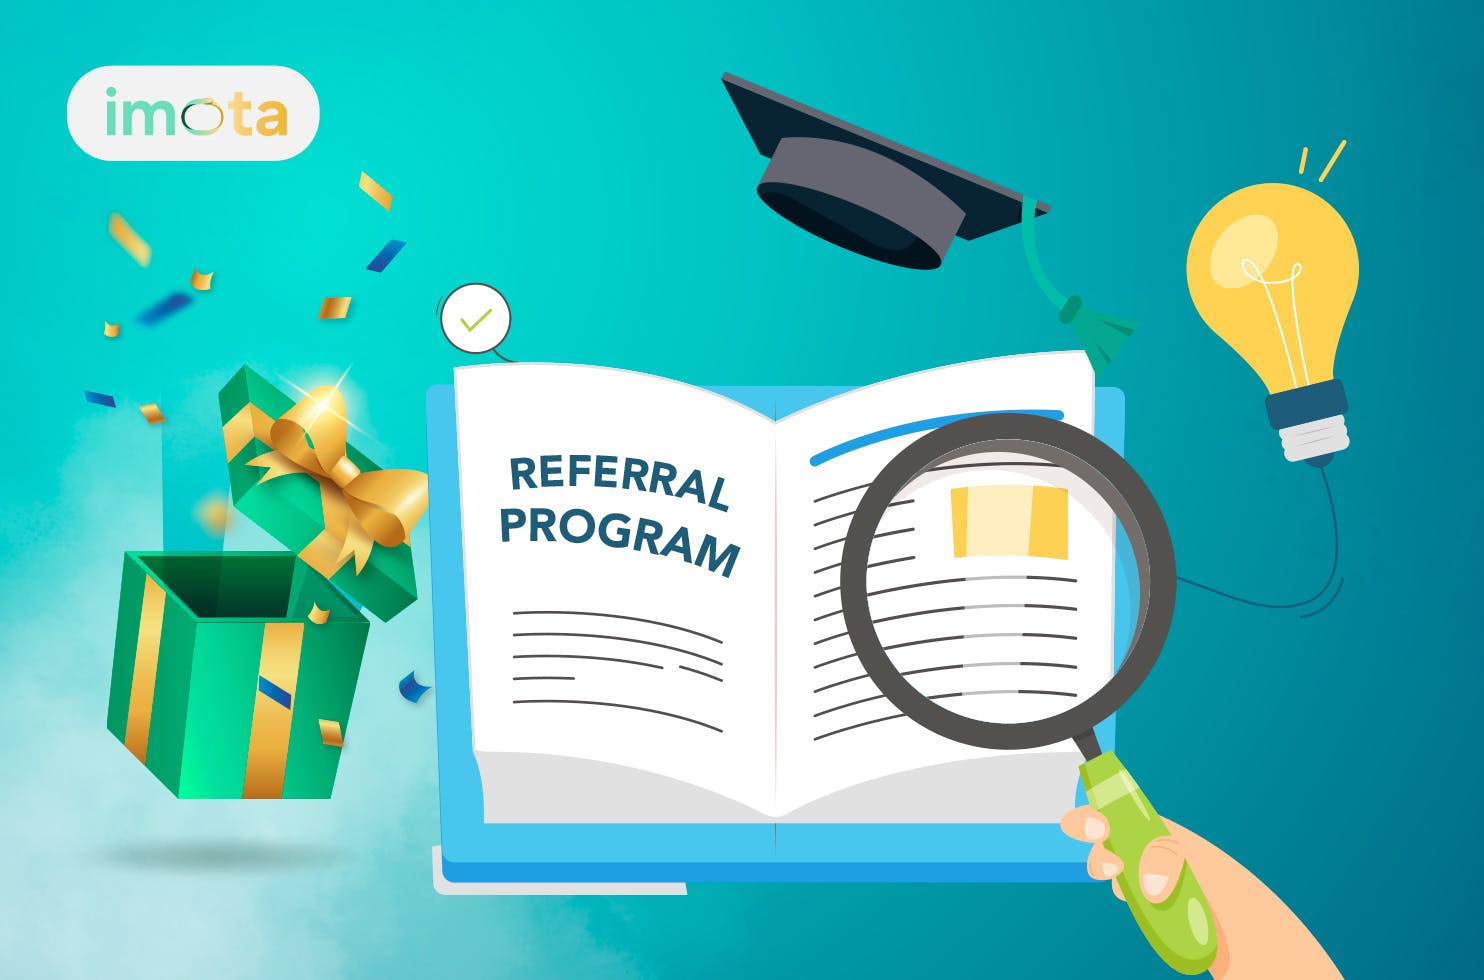 Referral Program 2.0 details - What does it mean and how to count your rewards?